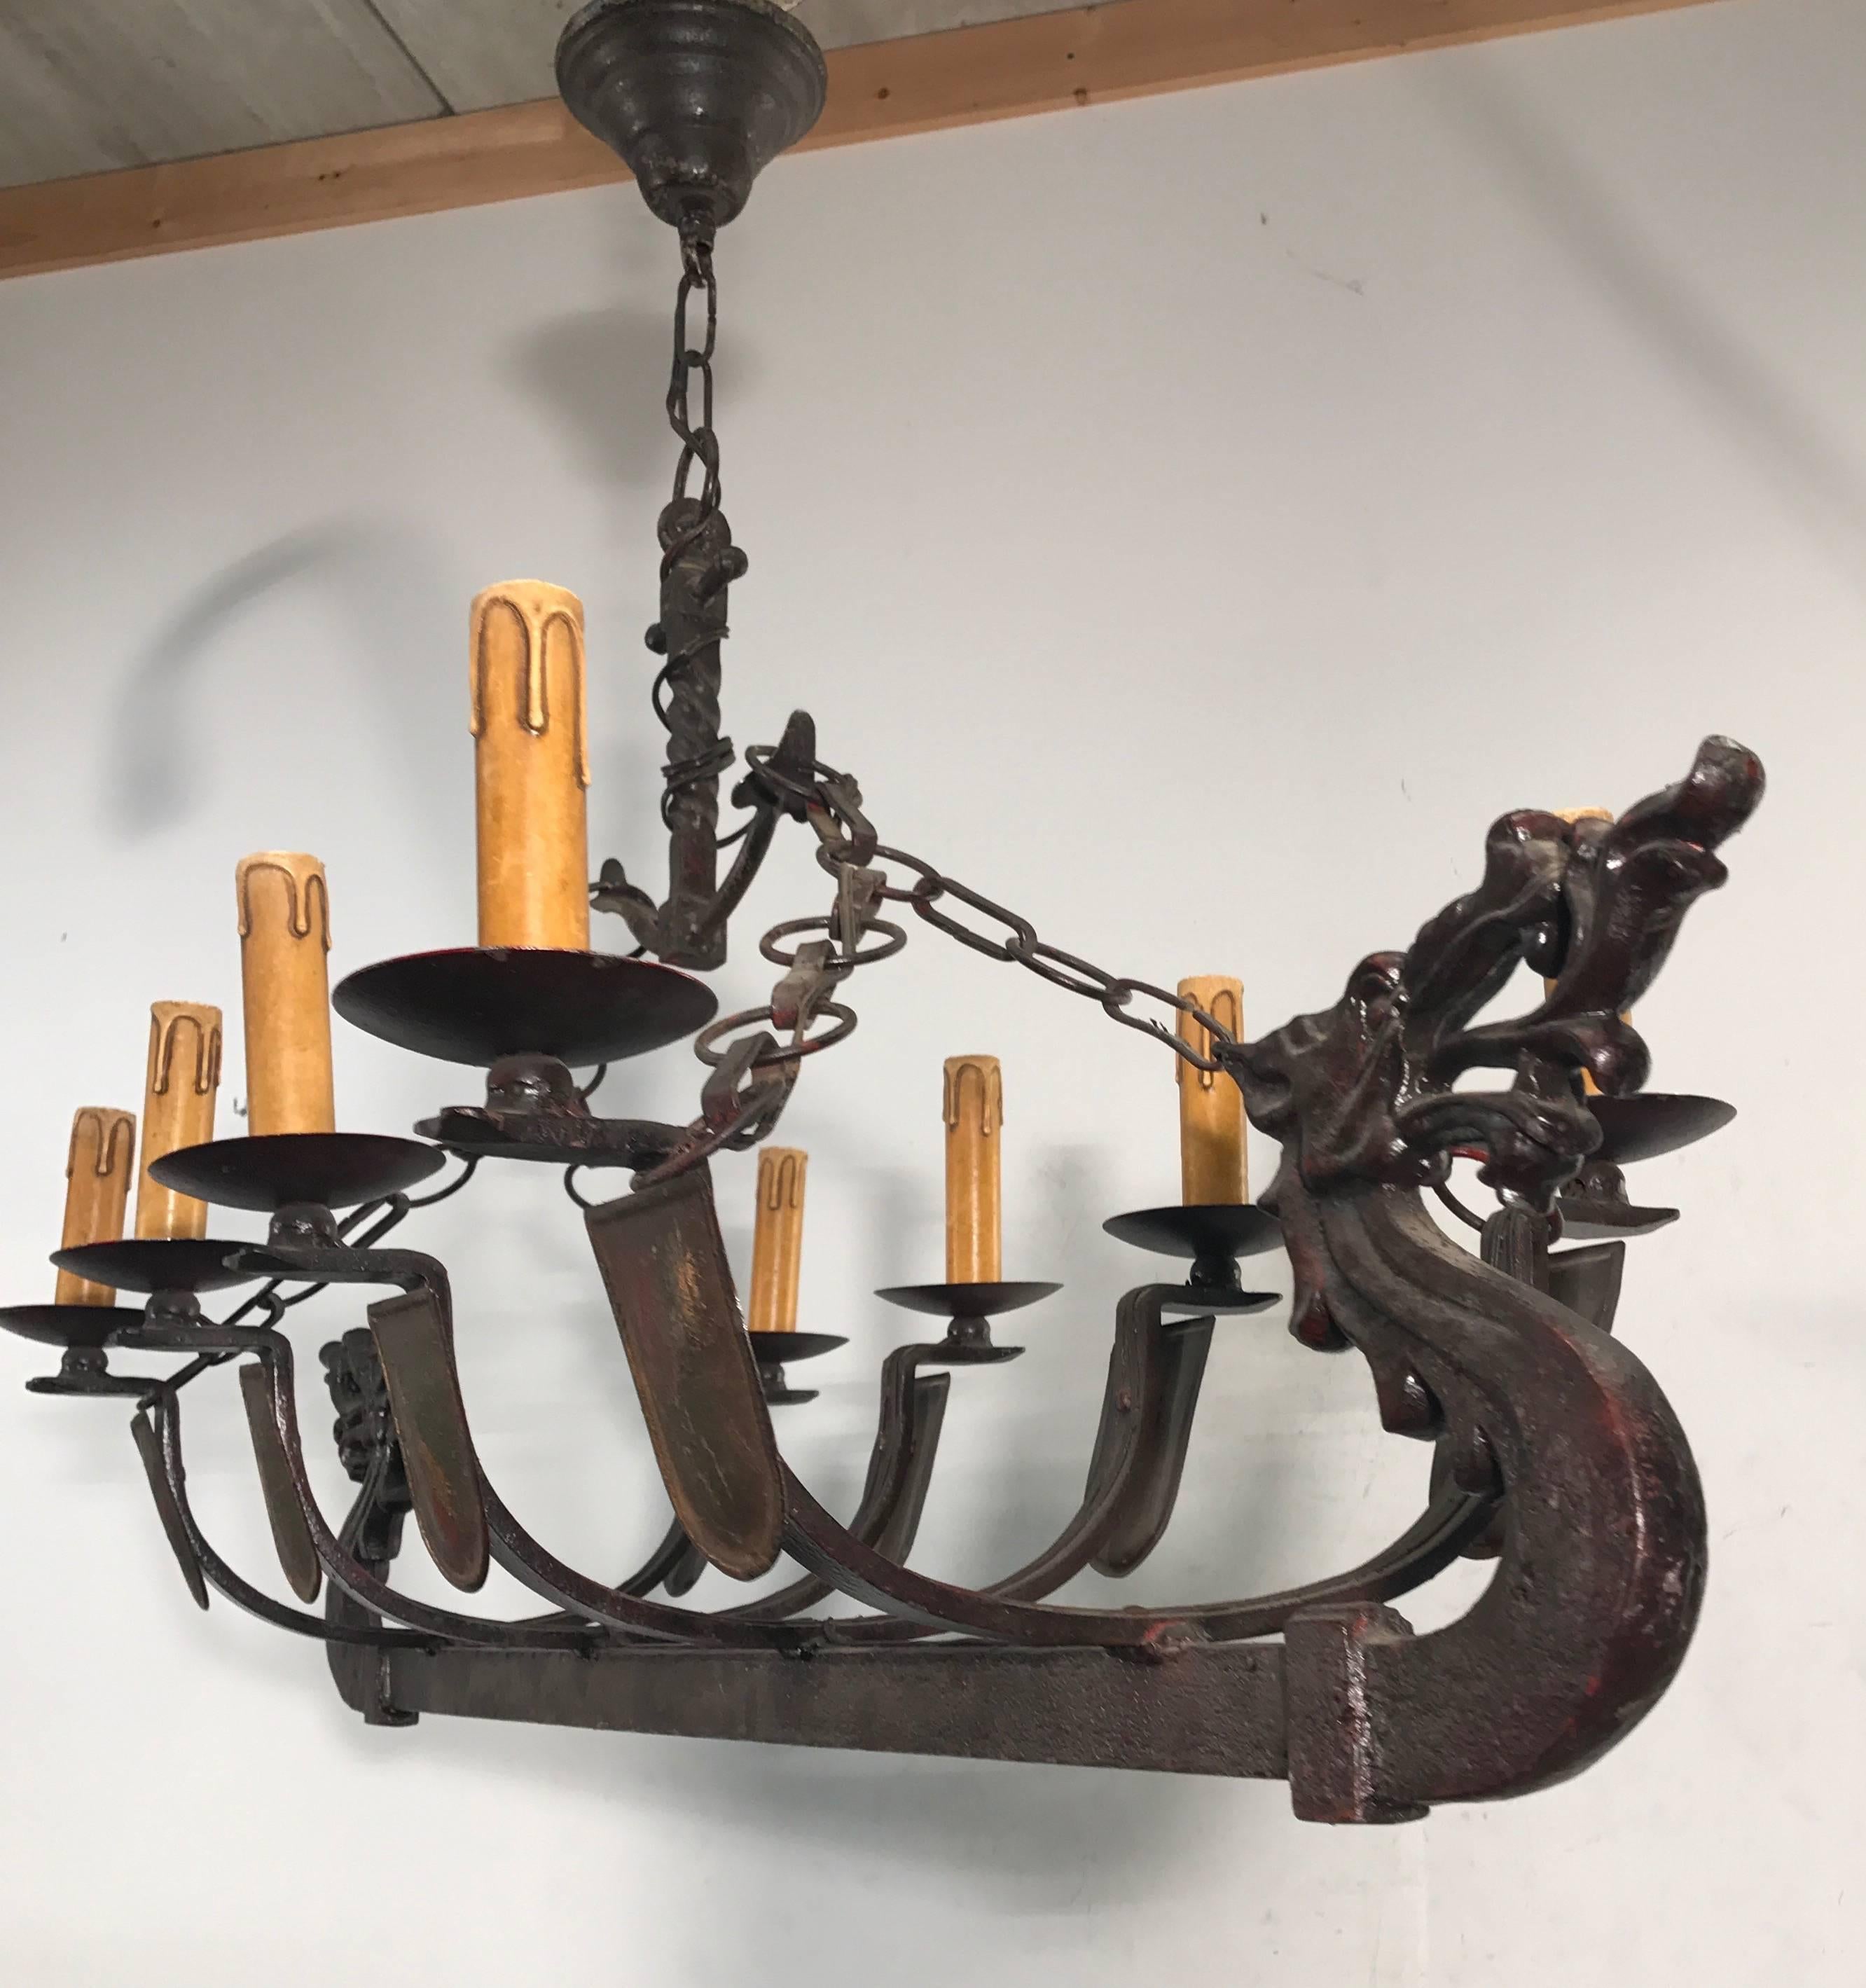 European Wrought Iron Medieval St. Viking Longboat Chandelier, Pendant Light with Dragons